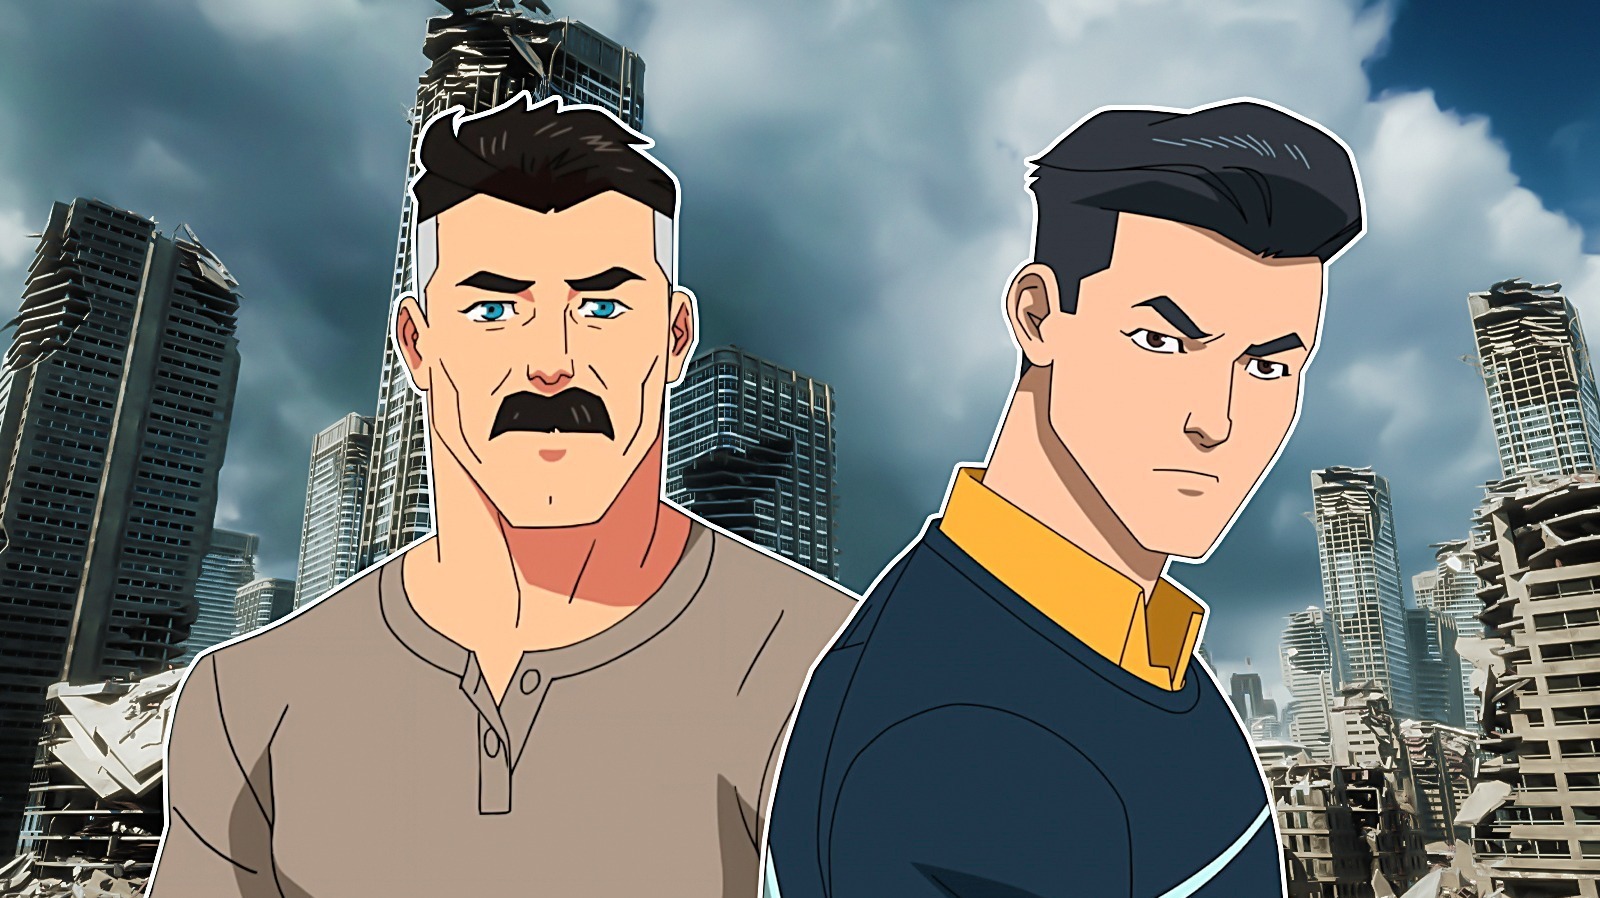 What to expect from Invincible Season 2 Episode 1?